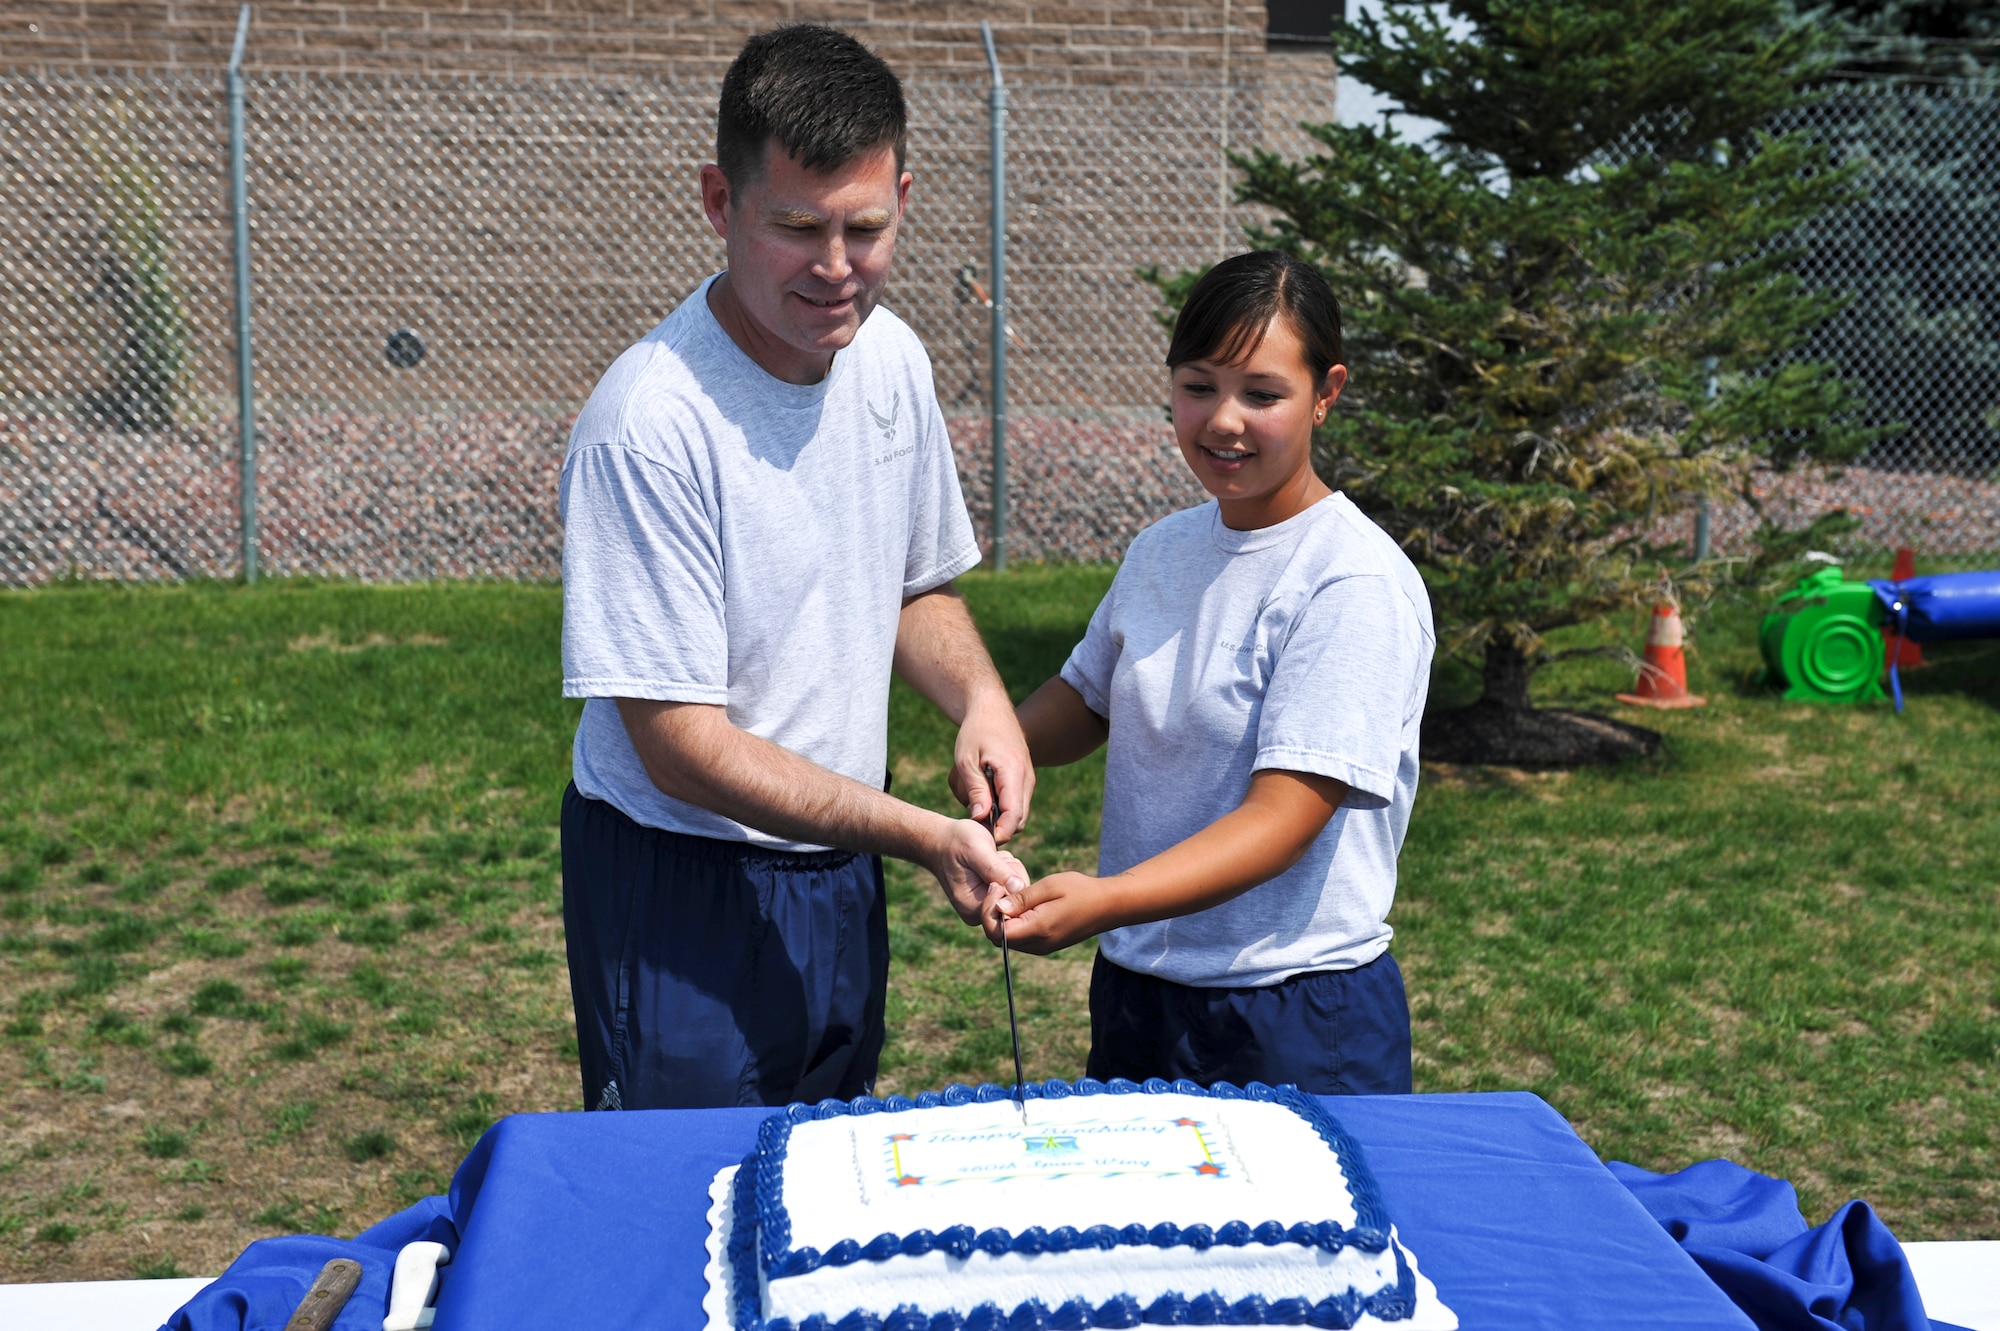 Col. Dan Wright, 460th Space Wing commander, and Airman Amanda Belarde, 460th SW Legal Office paralegal, cut a birthday cake at Fun Fest Aug. 16, 2013, at the softball fields on Buckley Air Force Base, Colo. Belarde was chosen to cut the cake because she is the Airman with the least amount of time-in-service assigned to the 460th SW. (U.S. Air Force photo by Airman 1st Class Riley Johnson/Released)